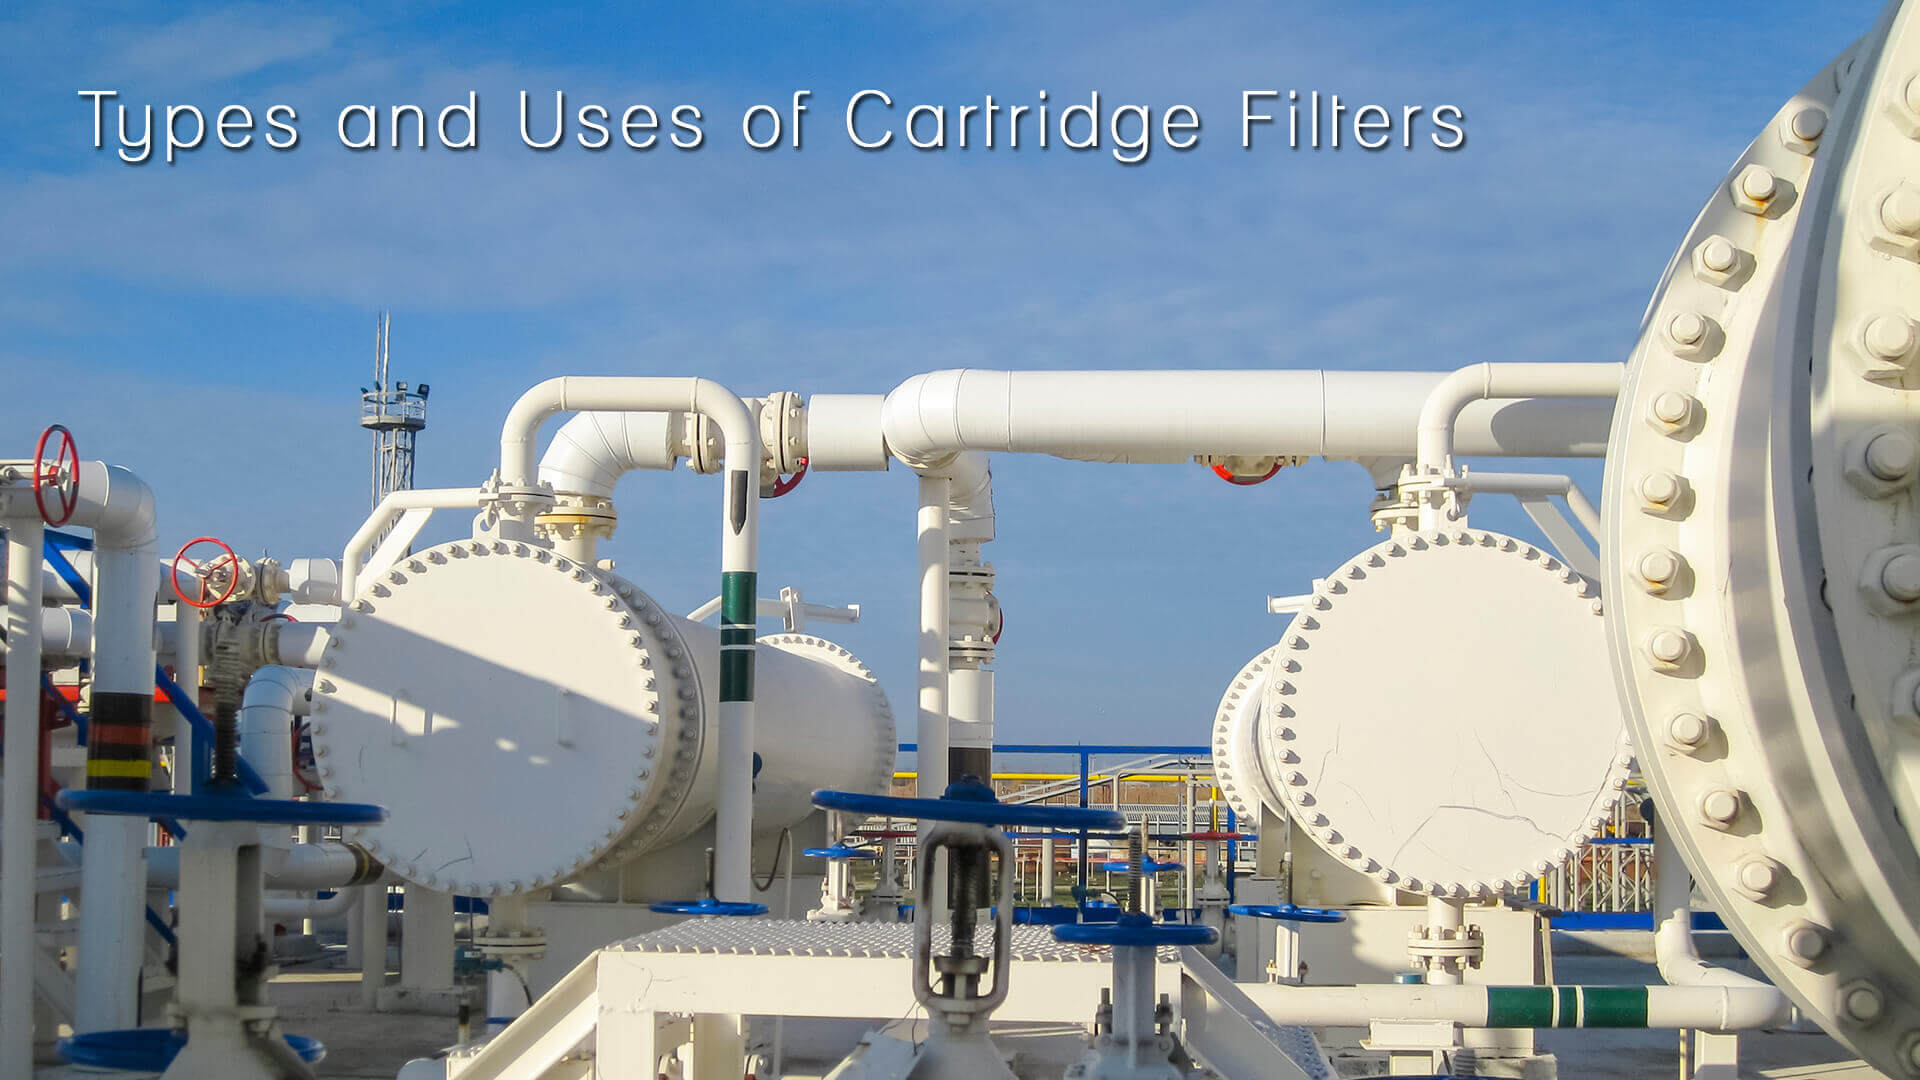 Types and Uses of Cartridge Filters